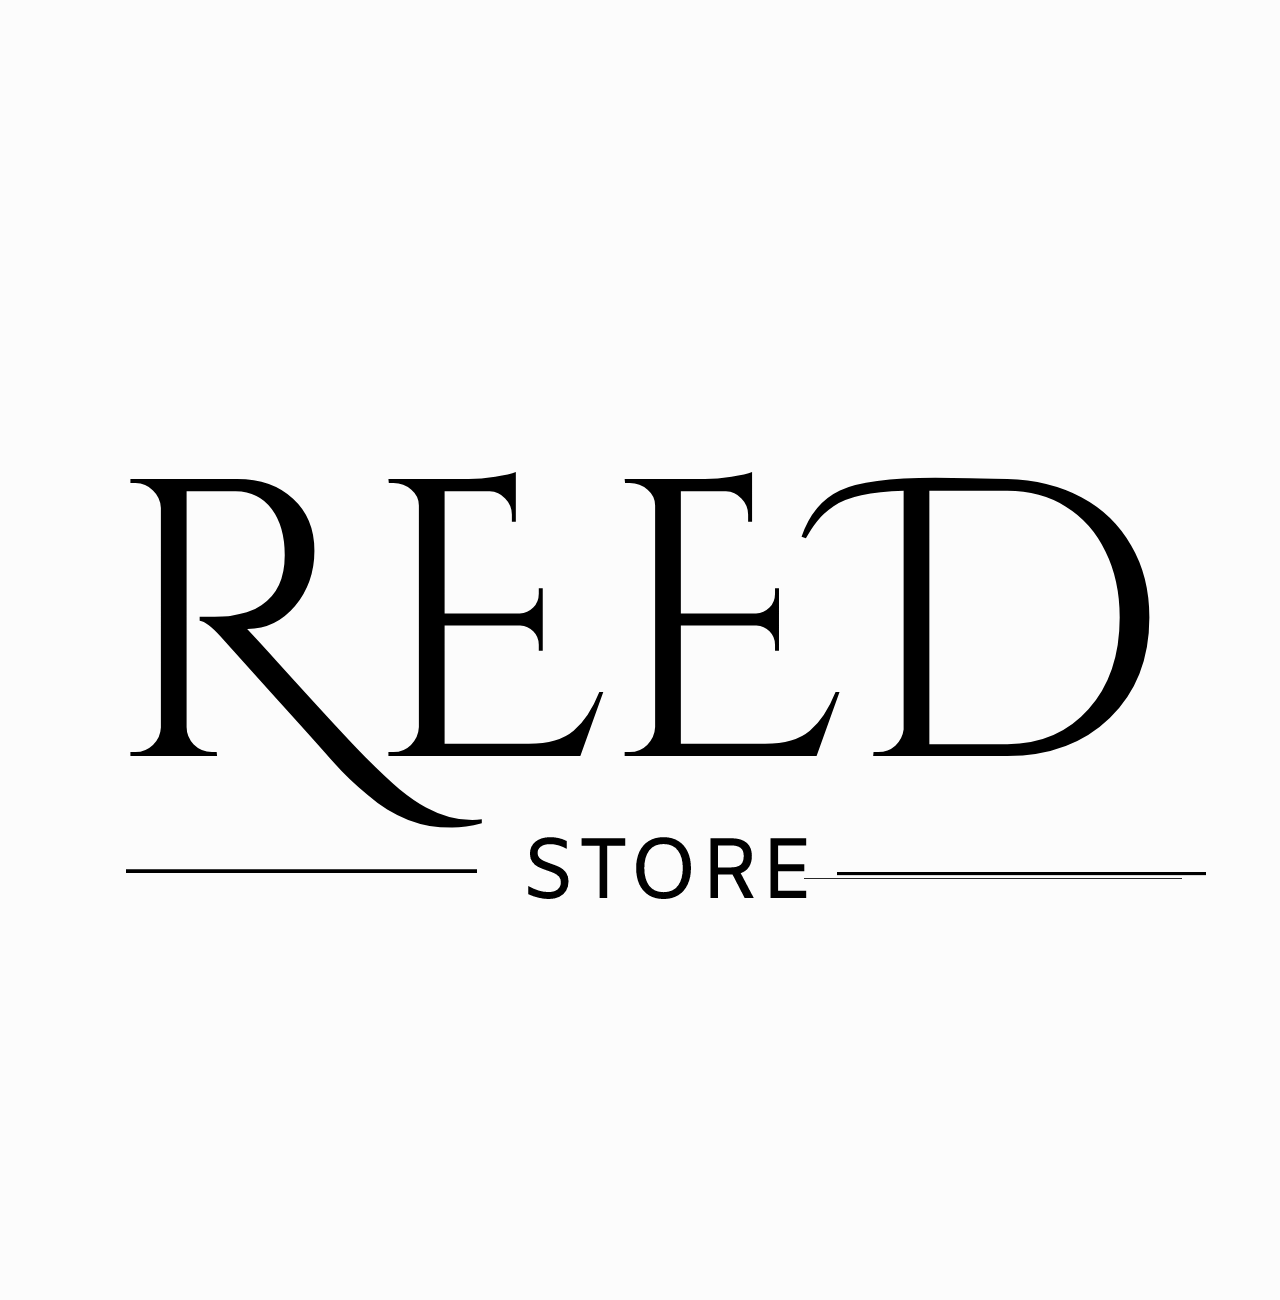 REED STORE